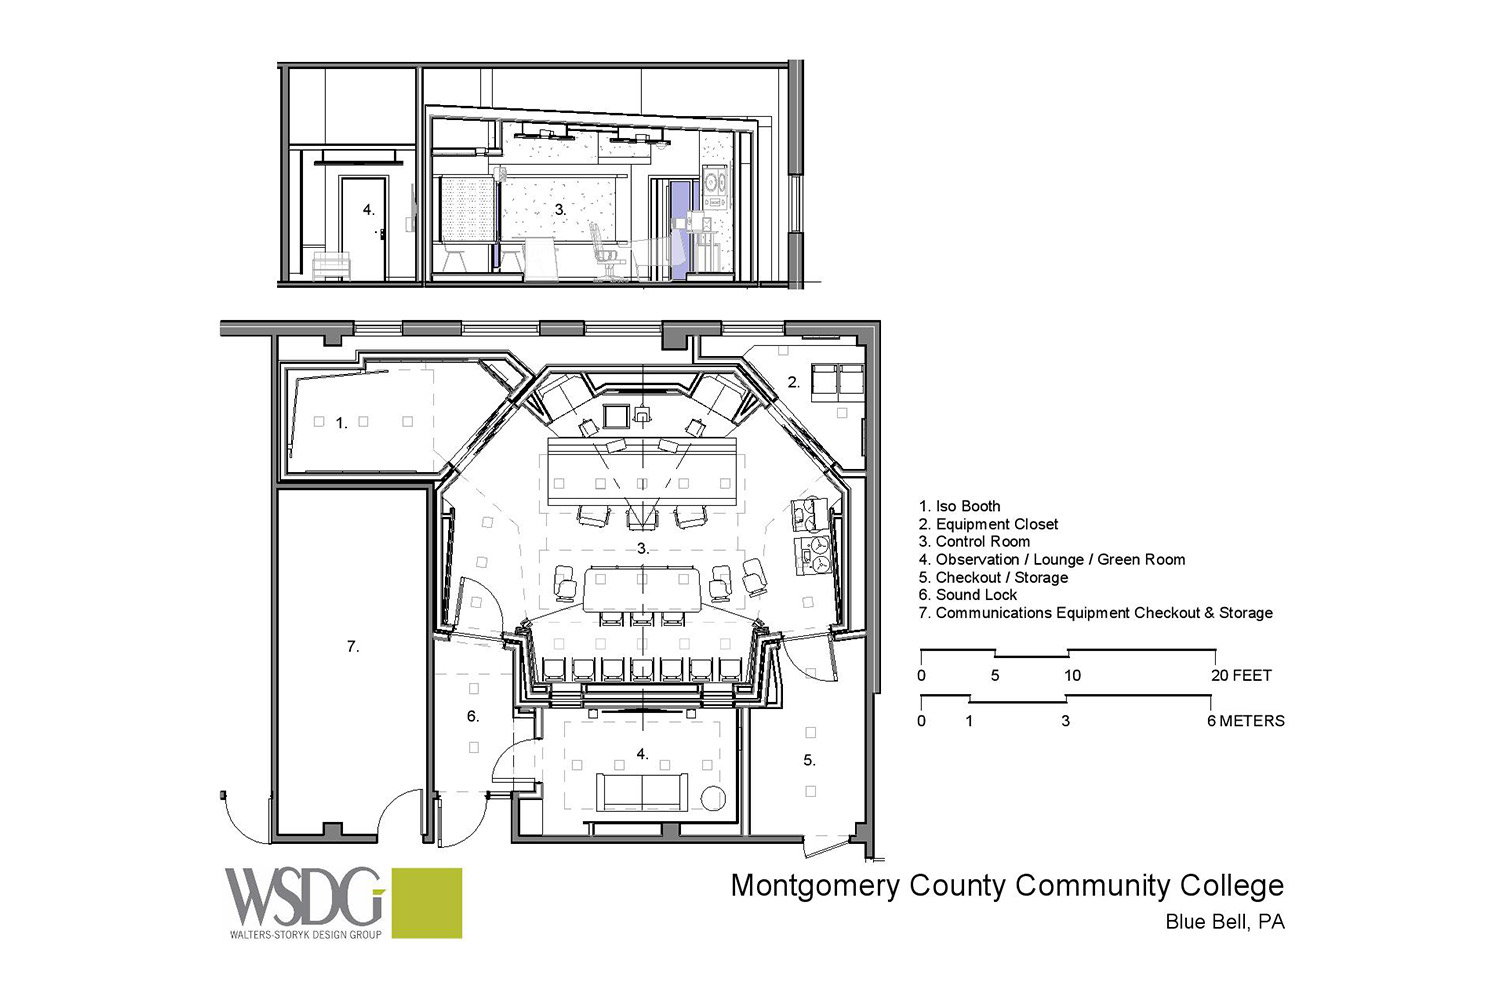 Montgomery County Community College in Blue Bell, PA brand-new Recording Studio for their Digital Music Technology course. Designed by WSDG. Architectural acoustics and media systems engineering. Presentation drawing.